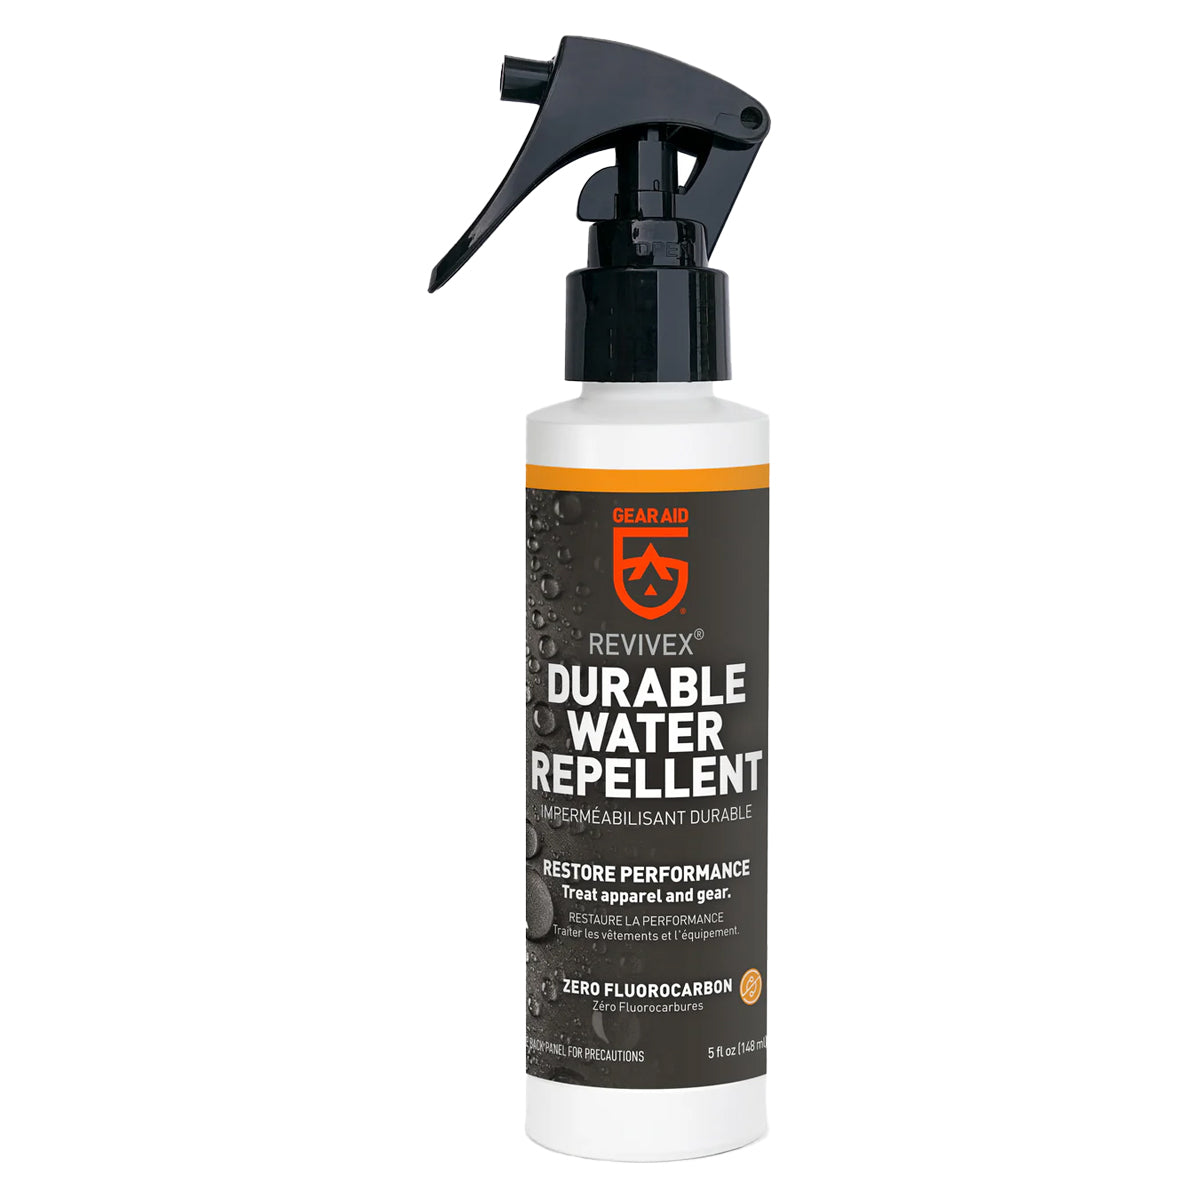 Gear Aid  Revivex Durable Water Repellent 5 fl oz in  by GOHUNT | Gear Aid - GOHUNT Shop